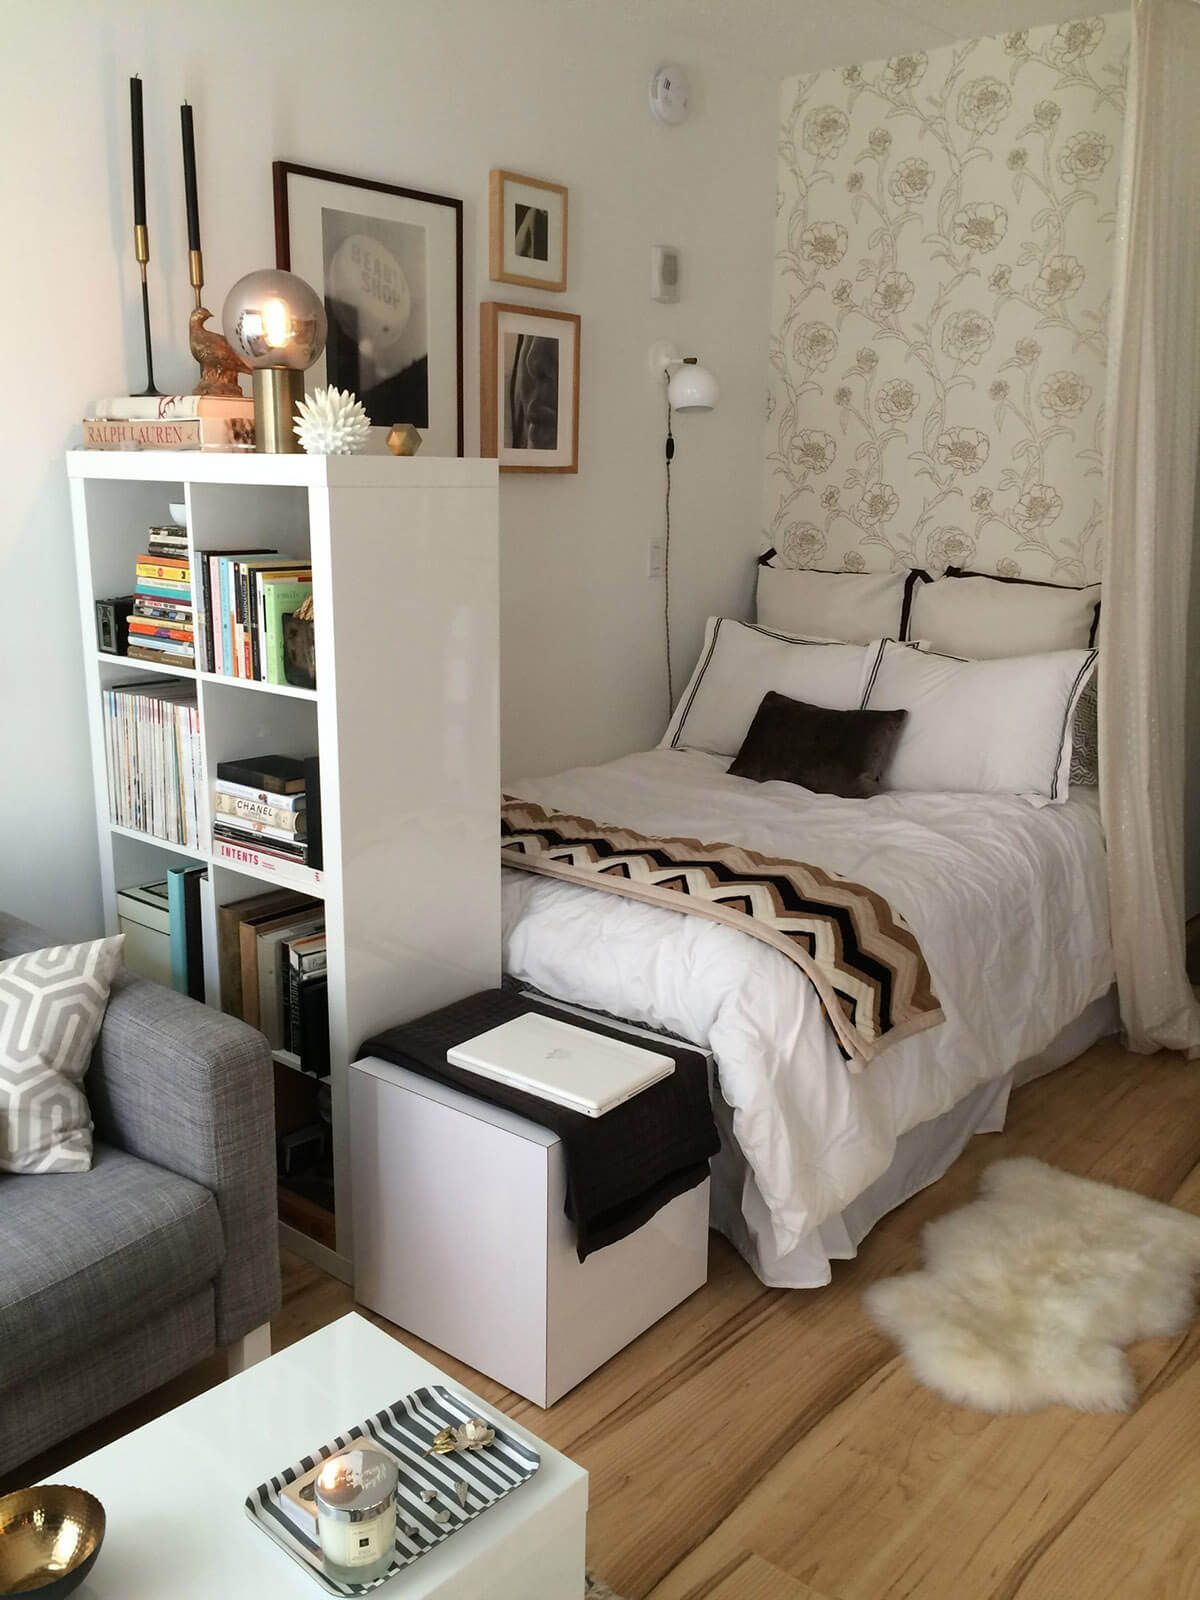 Small Bedroom Ideas with a Tall Bookshelf